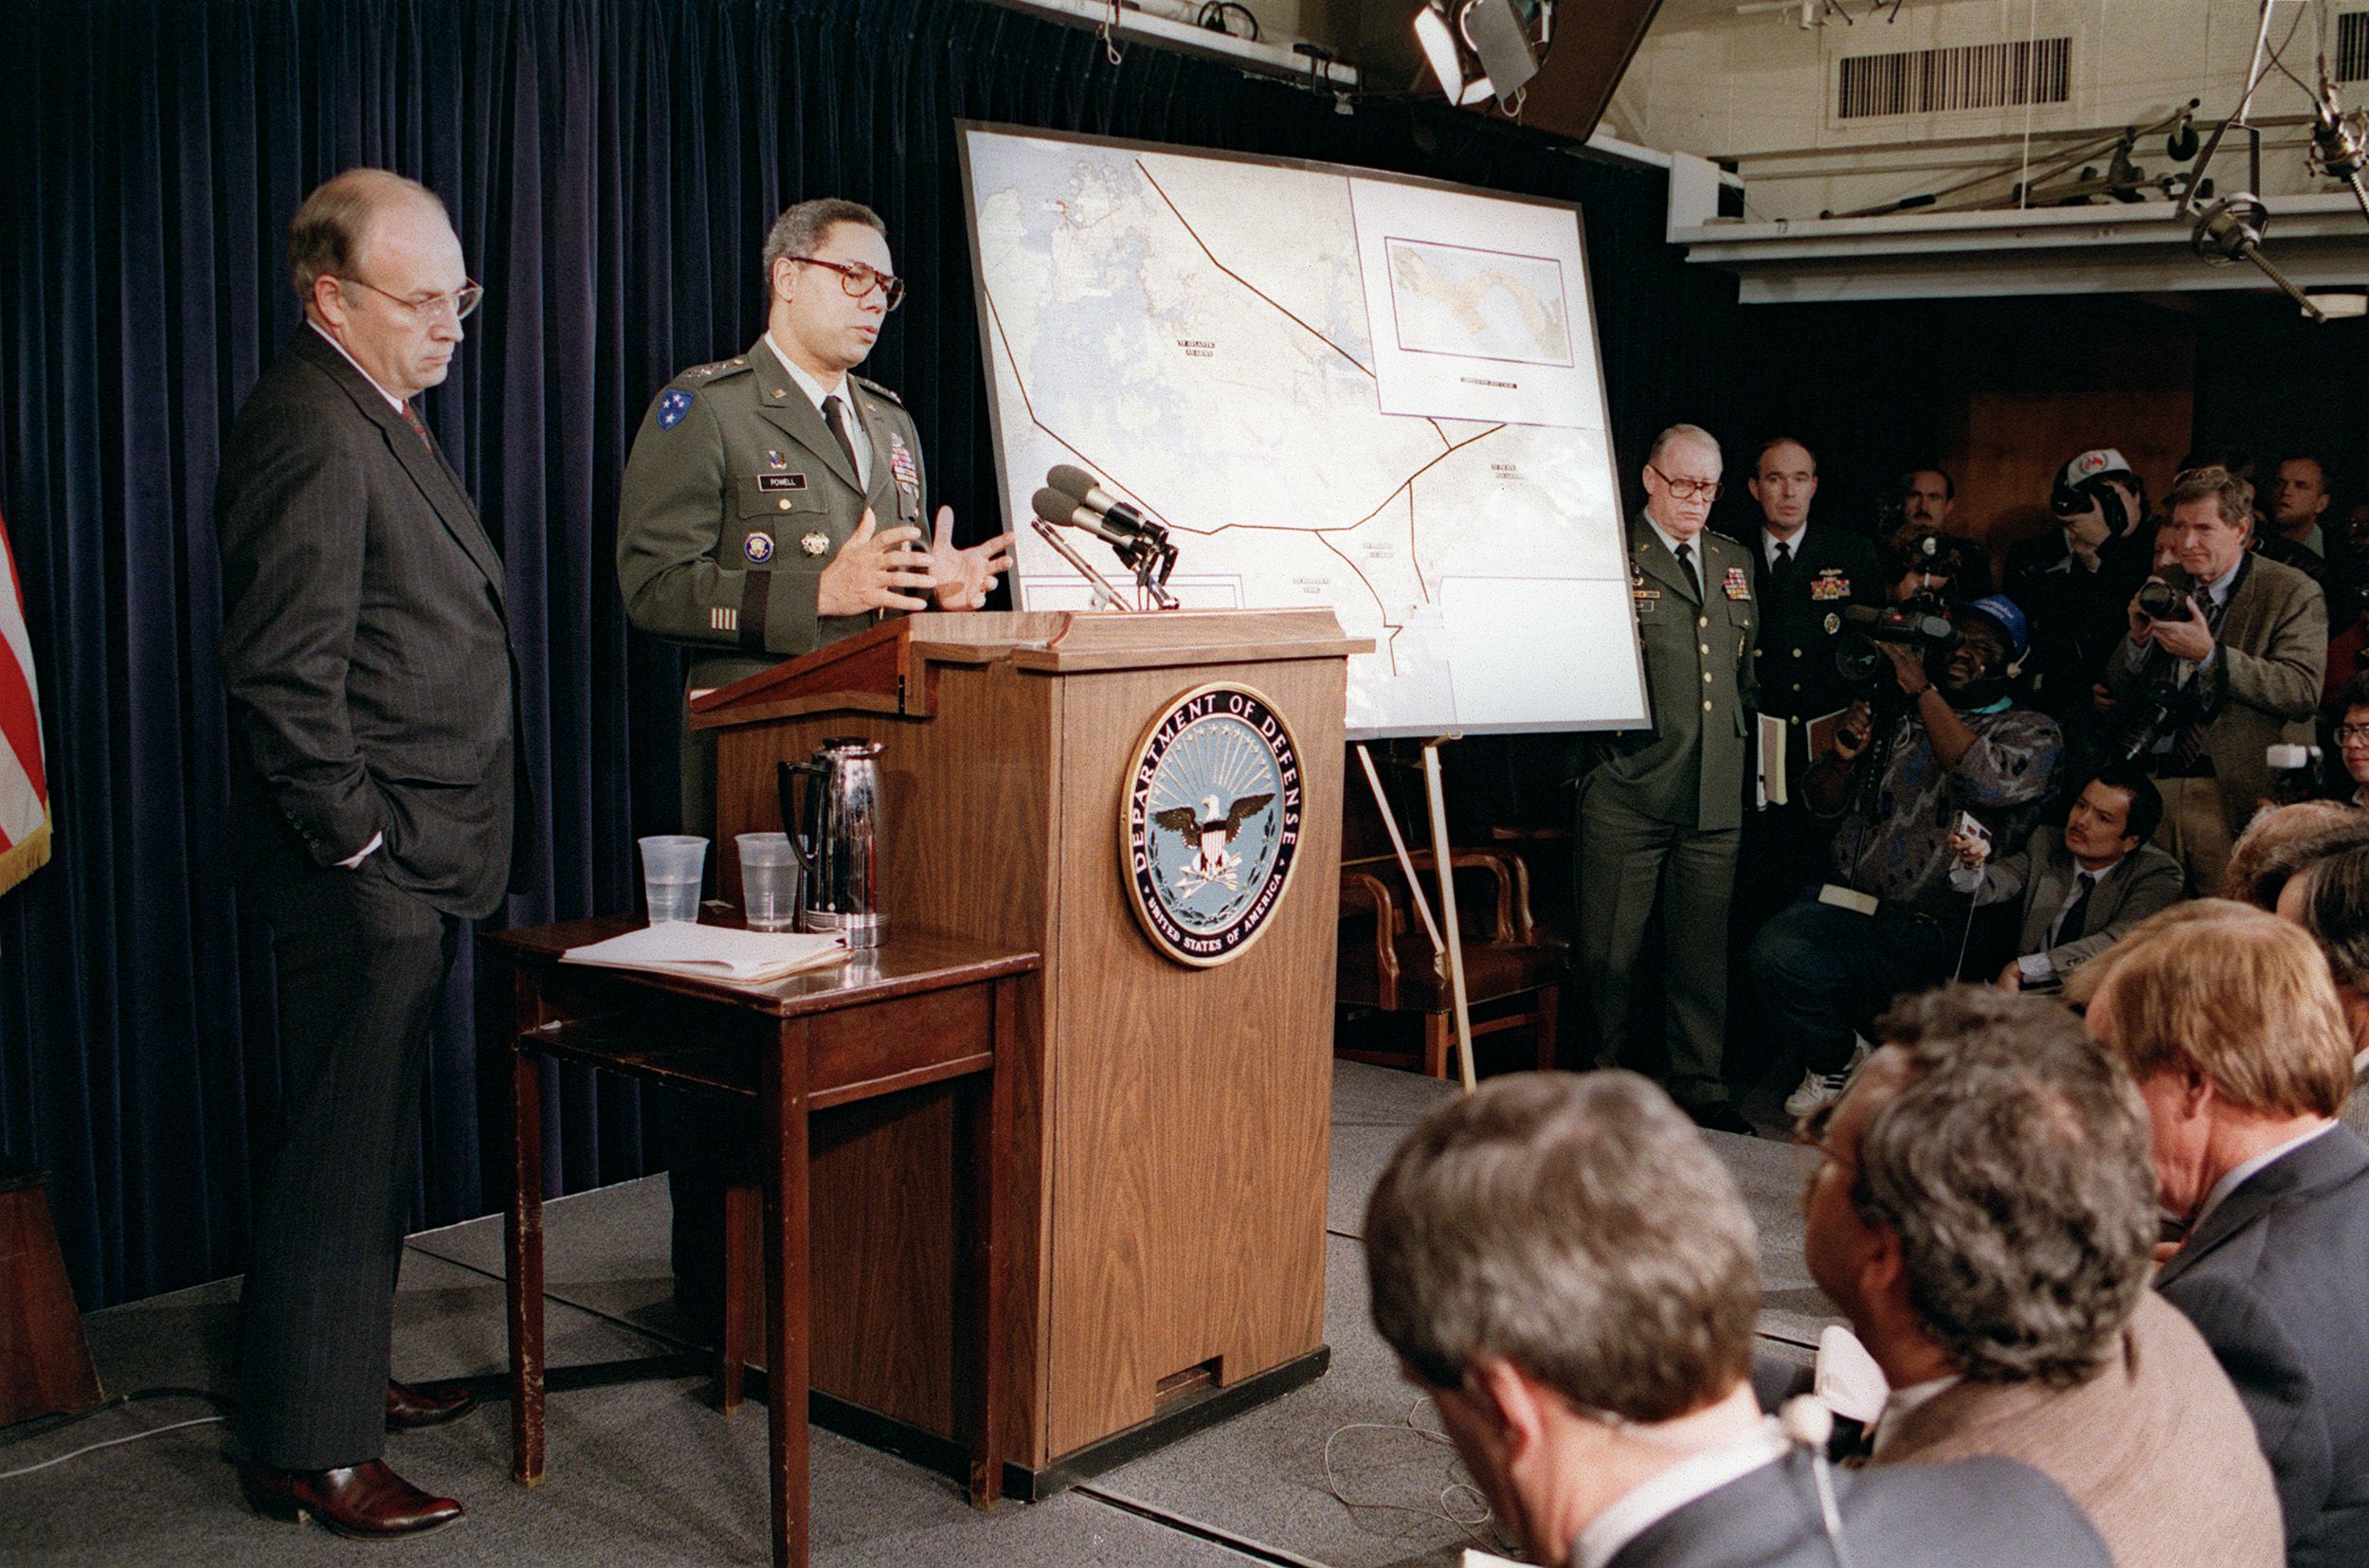 Colin Powell addressing the press about an invasion in Panama.